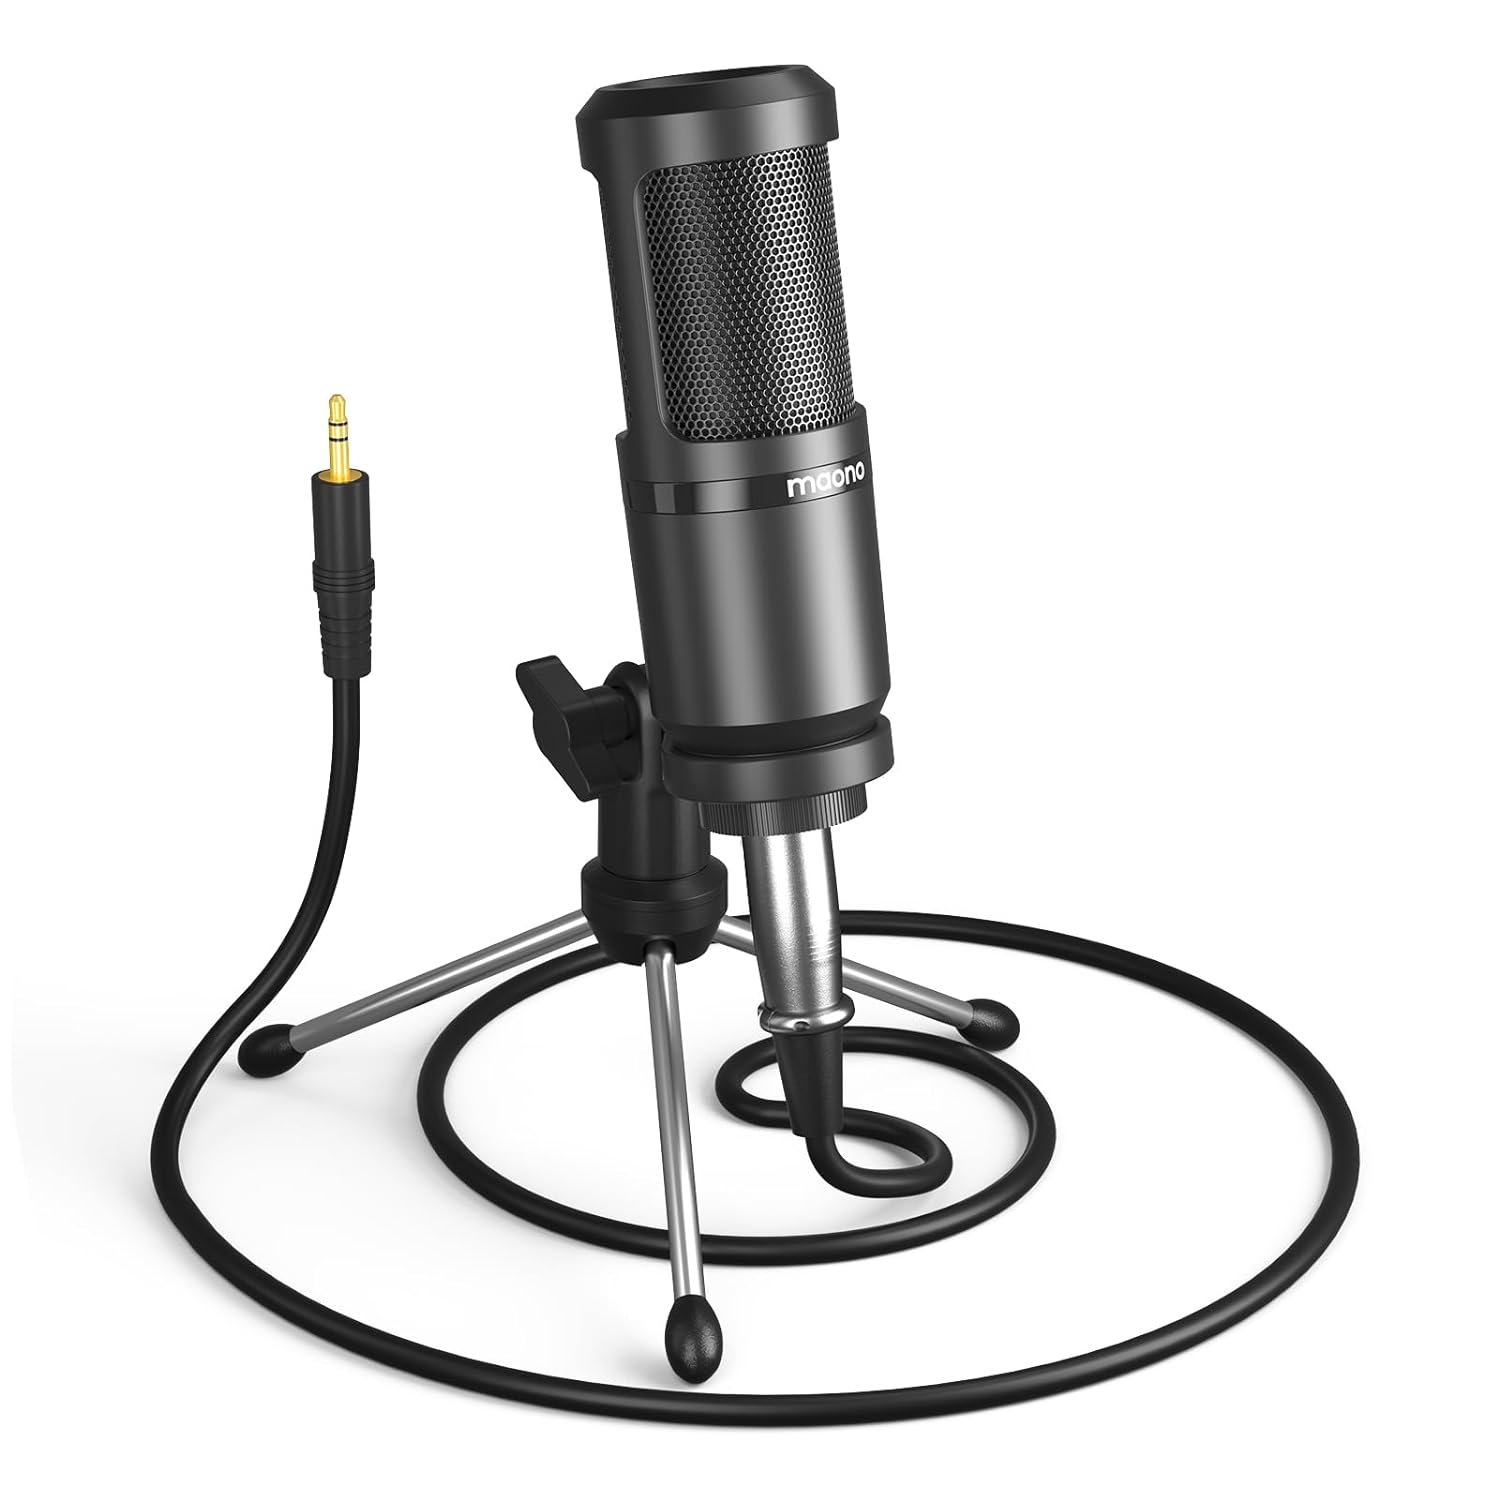 MAONO Condenser Microphone, Cardioid Studio Condenser Recording Mic with 3.5mm XLR for podcasting, Streaming, Singing, Vocal, Home-Studio (AU-PM360TR)